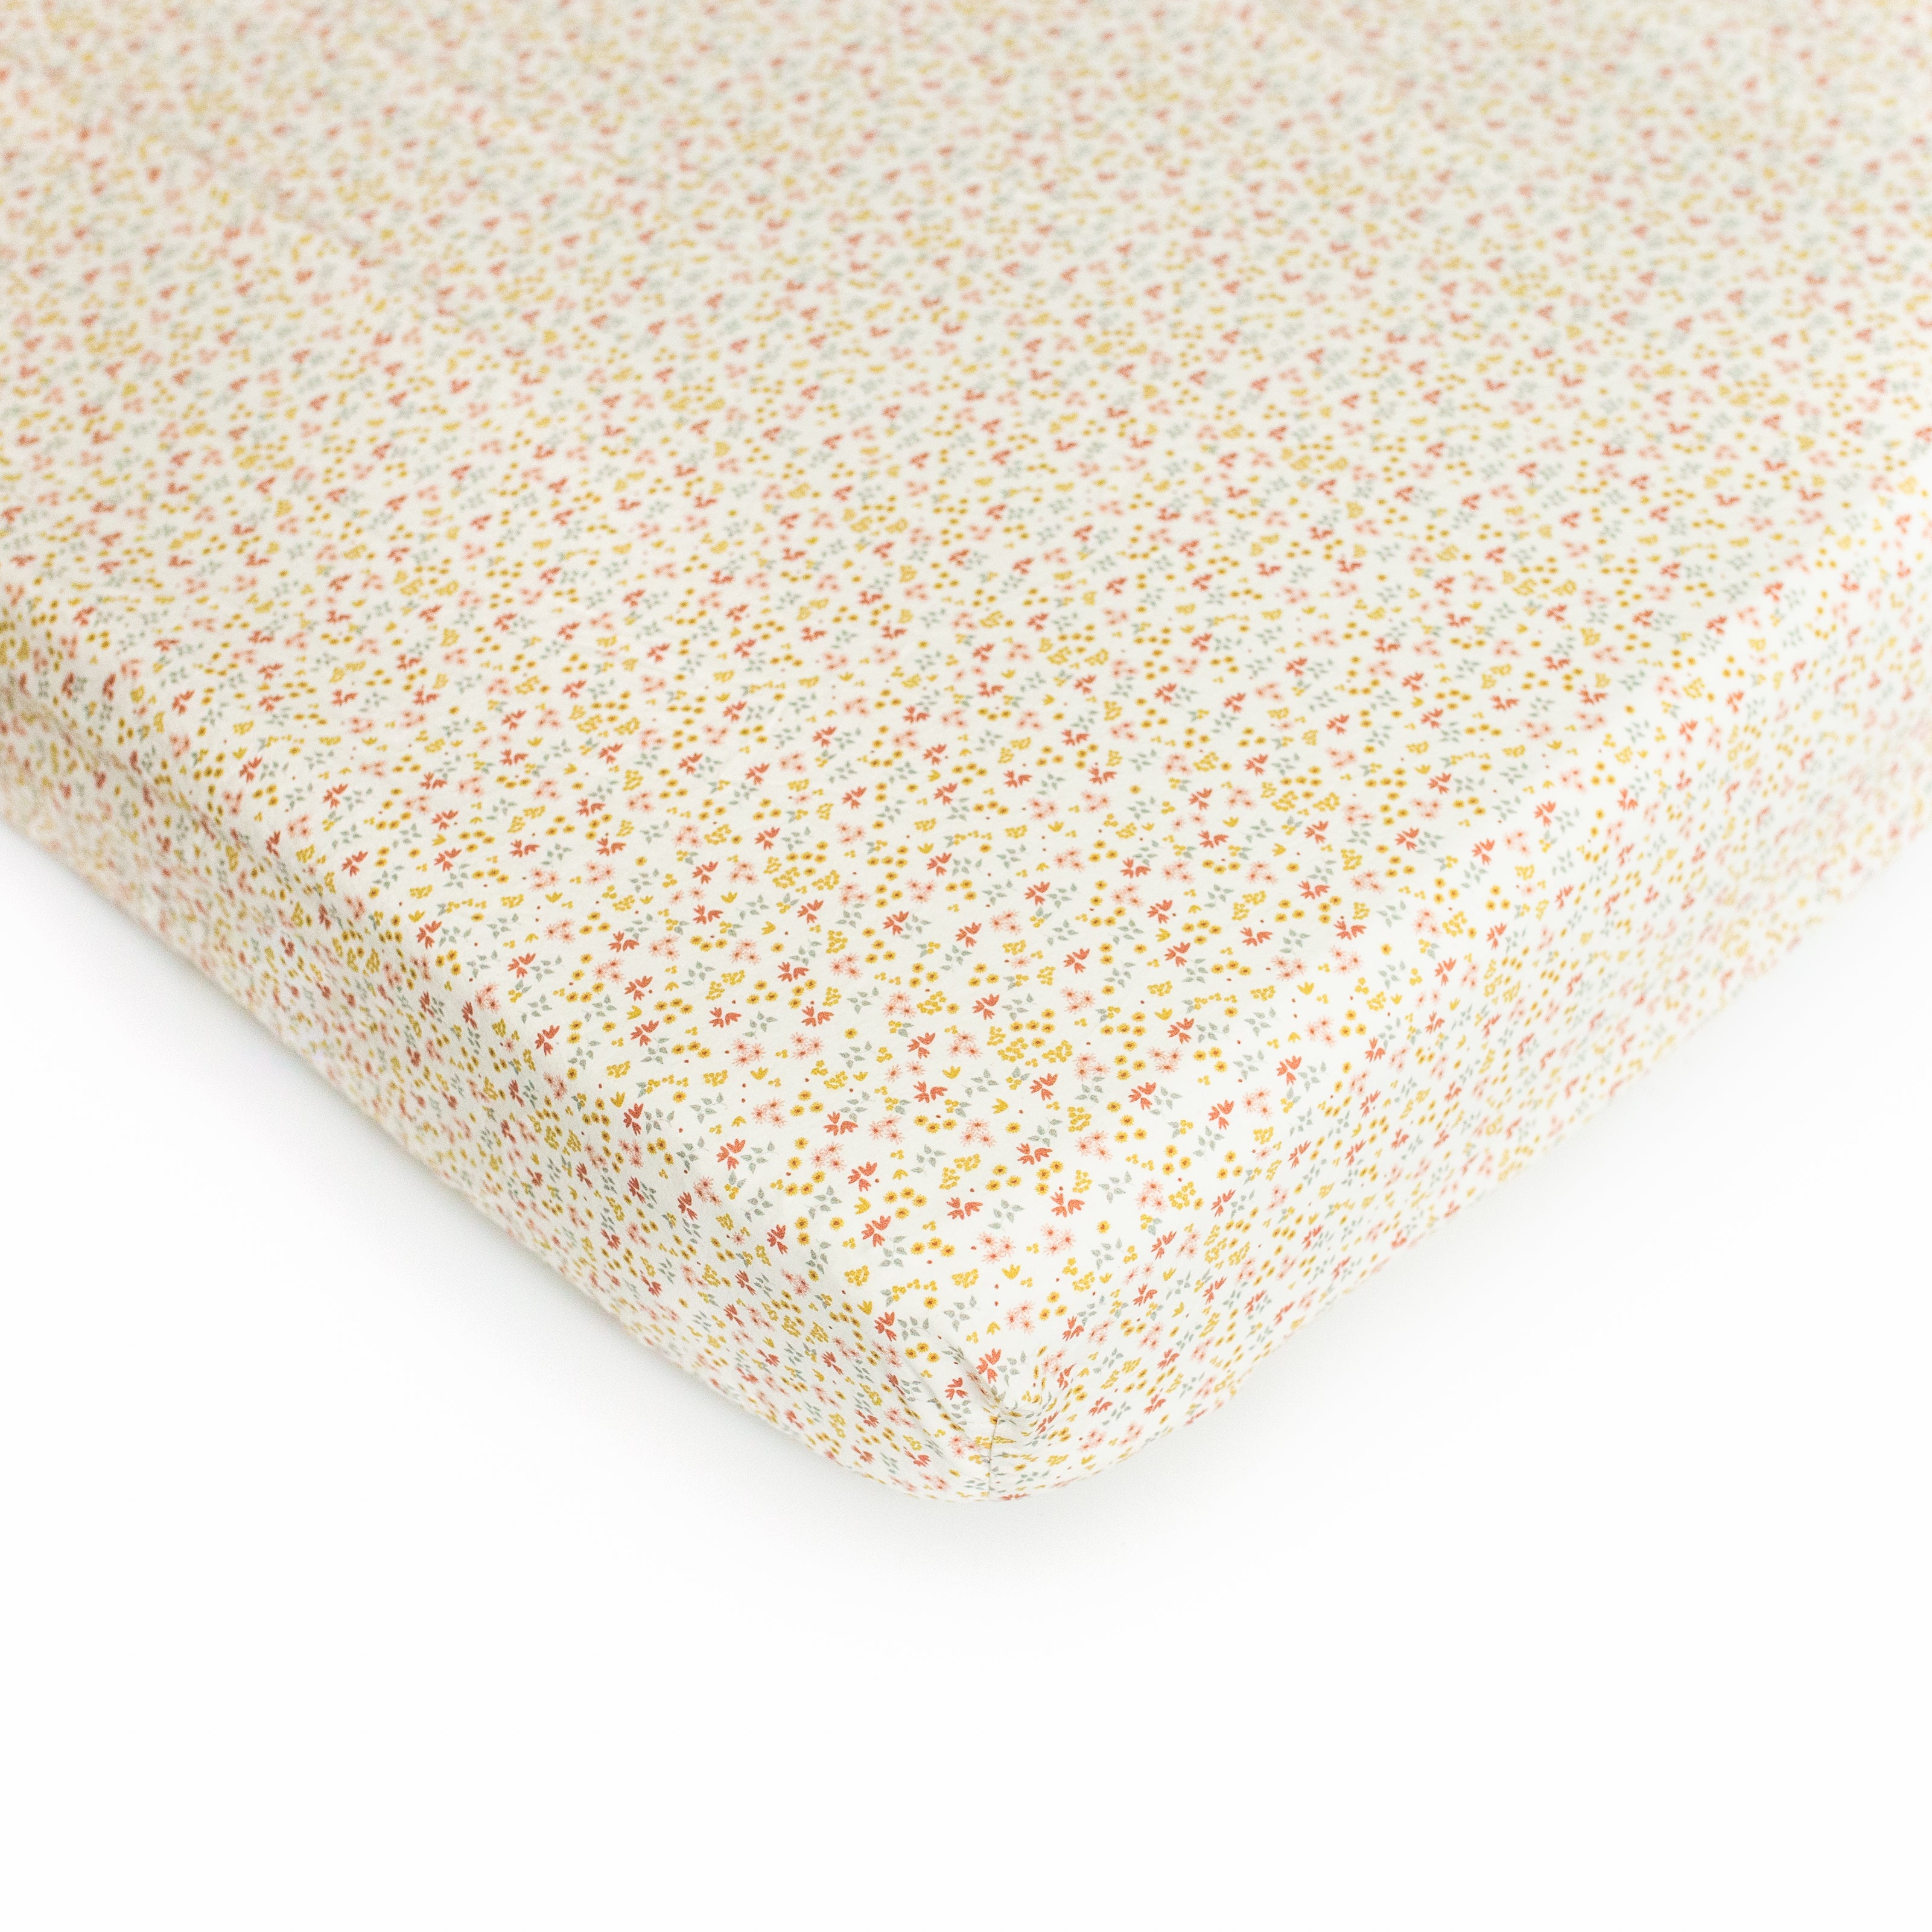 An Oolie organic cotton crib sheet with the prairie print, a natural color with very small flowers.